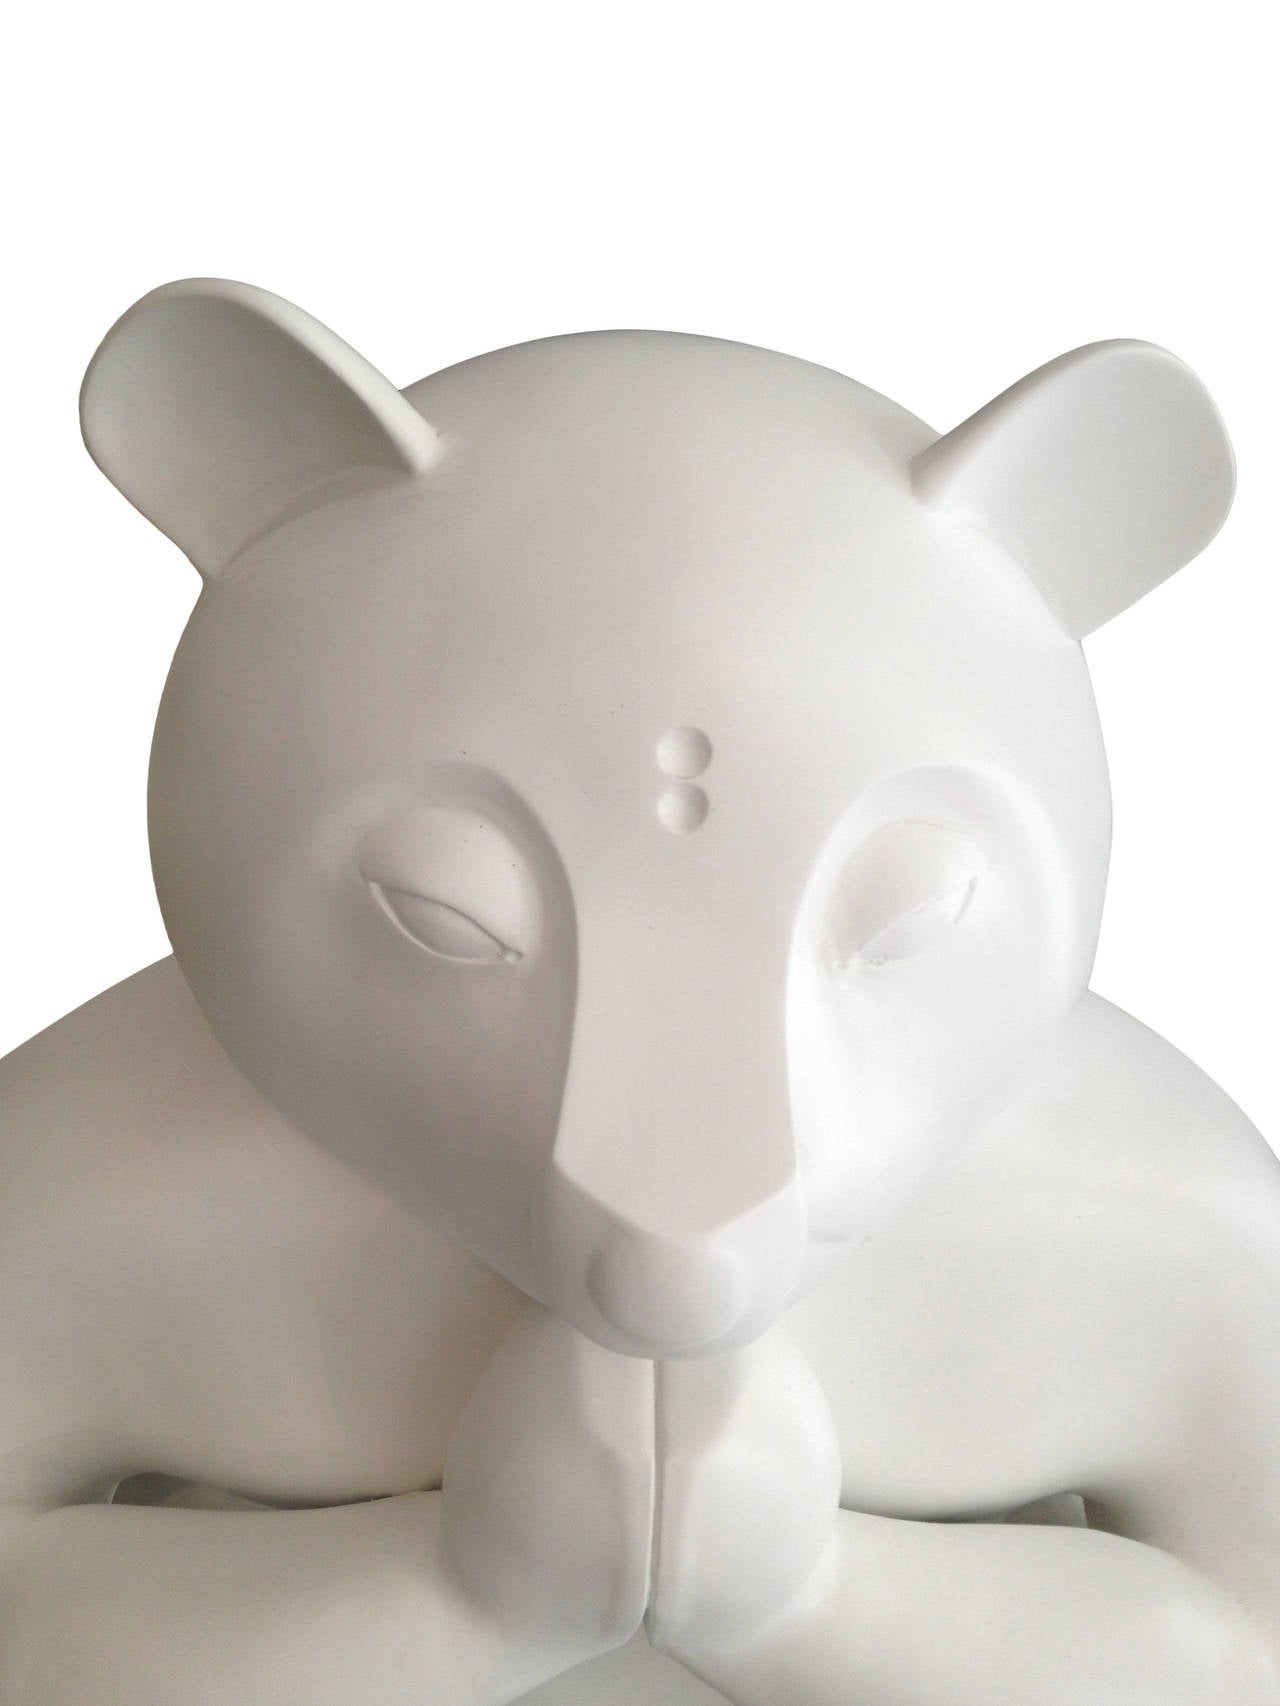 Statue of a white bear meditating.
Signed and dated at the bottom: 